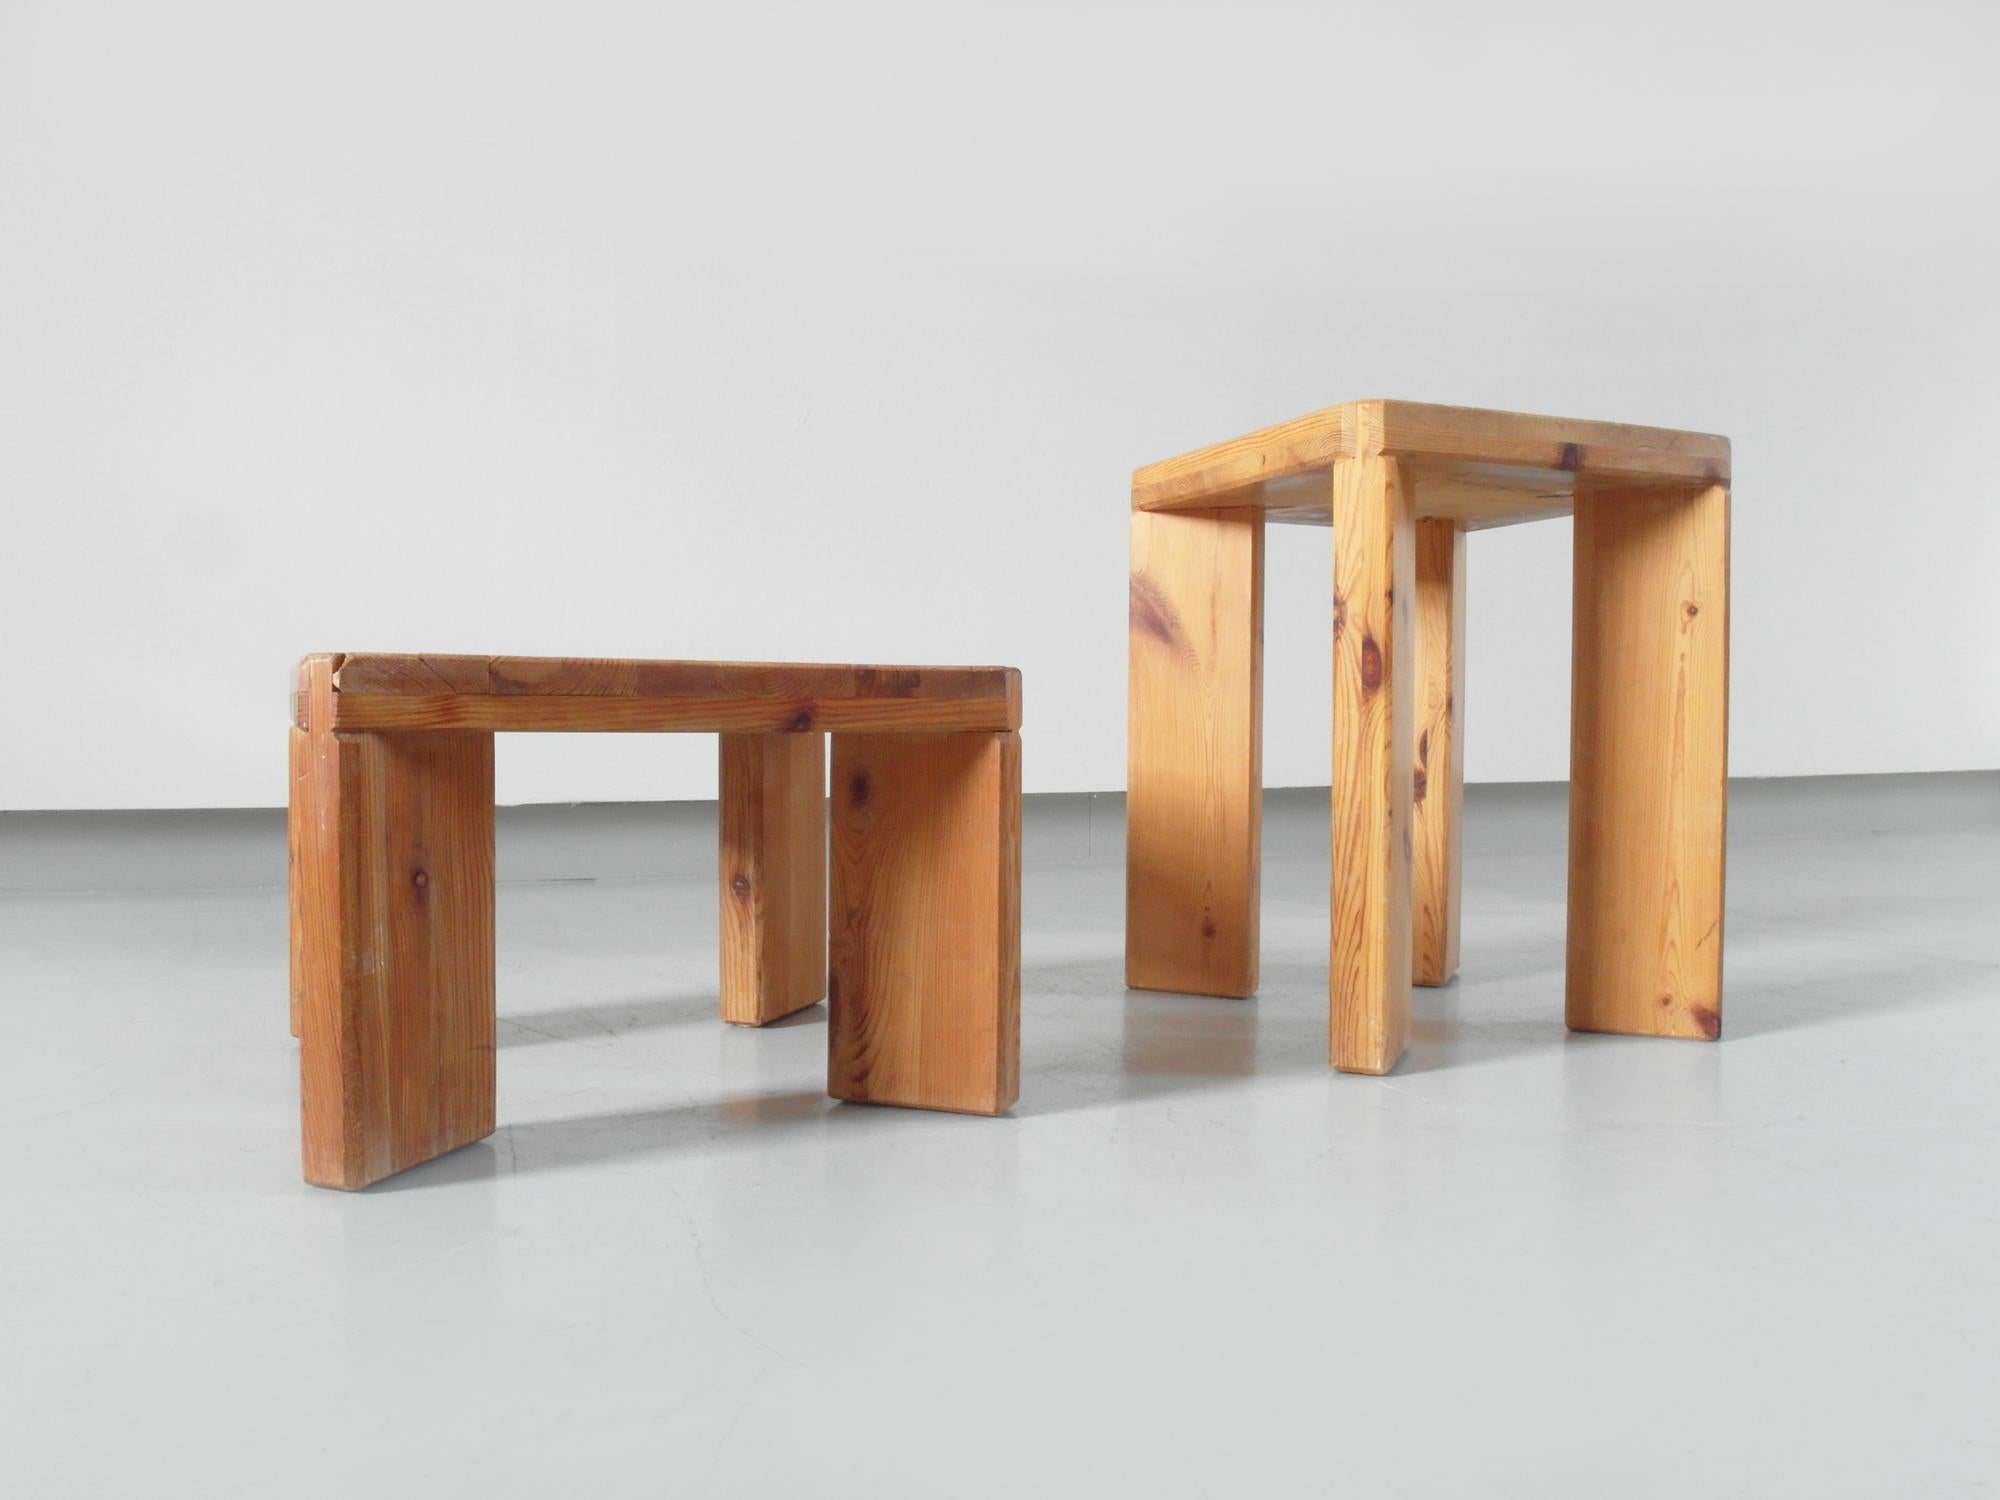 Roland Wilhelmsson, Unique Pair of Signed Stools, Studio of Artist 1965 and 1970 For Sale 12